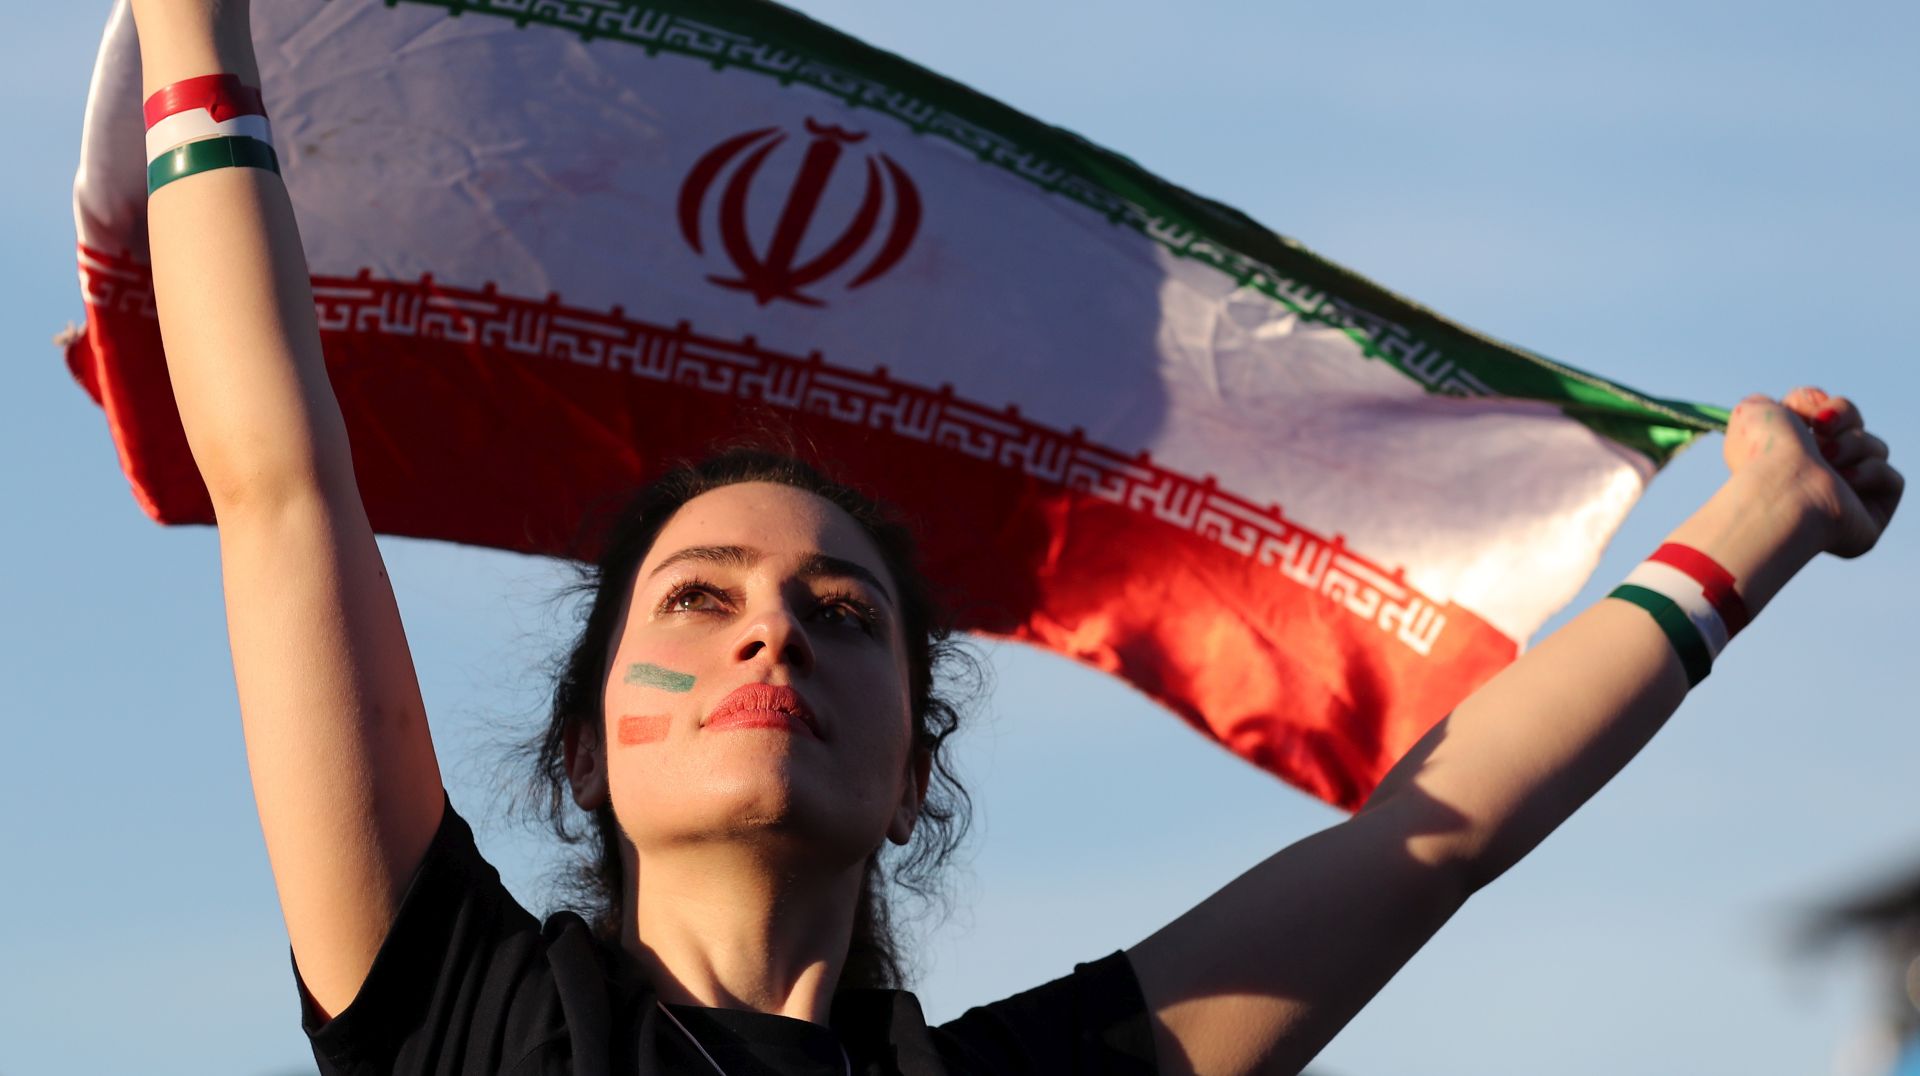 epa07853276 (FILE) - A woman holds up Iran's national flag as she watches a FIFA World Cup 2018 preliminary soccer match in the FIFA fan zone in Moscow, Russia, 15 June 2018 (reissued 19 September 2019). FIFA president Gianni Infantino on 19 September 2019 released a statement calling for women to be allowed into football stadiums in Iran. The statement added that the situation is 'unacceptable' and that FIFA is expecting positive developments from the Iranian Football Federation (FFIRI) and Iranian authorities starting by the next Iran home match in October 2019. Iran has barred women from attending sports stadiums after its 1979 Islamic Revolution.  EPA/ZURAB KURTSIKIDZE *** Local Caption *** 54410742